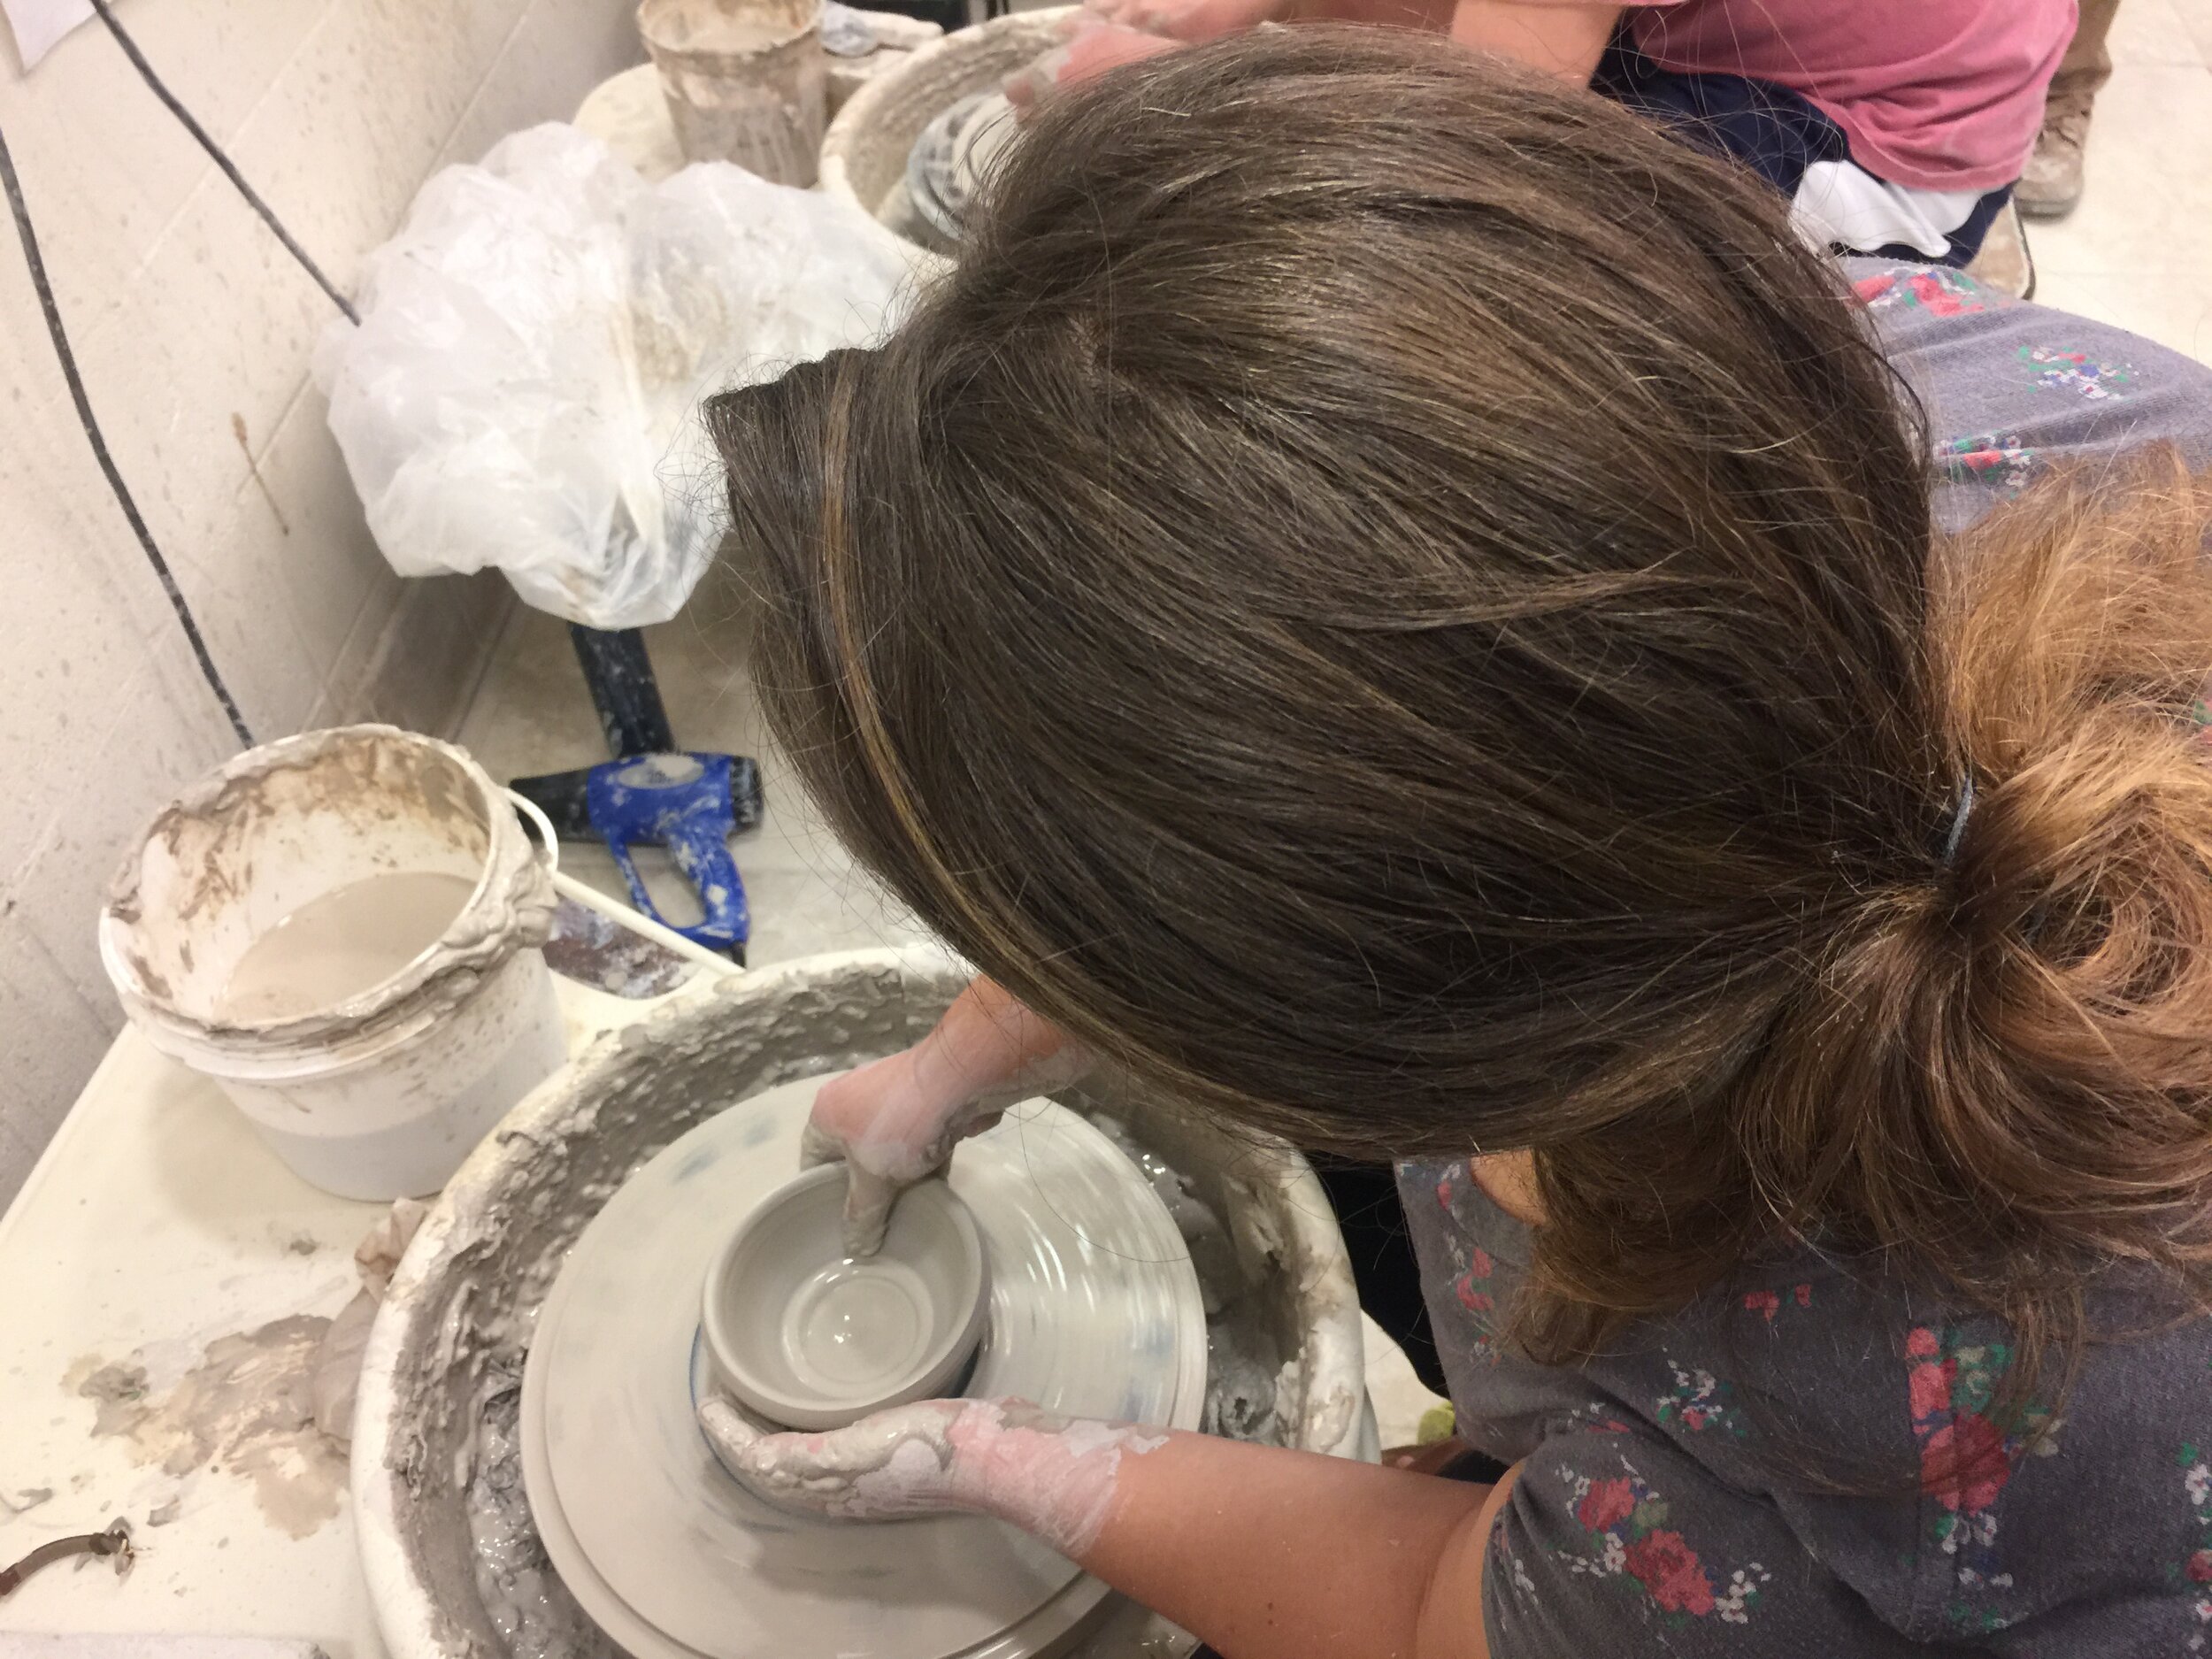 Pottery Workshop at Sam Fox School of Design - Introduction to East Asian Religions (Spring 2017)